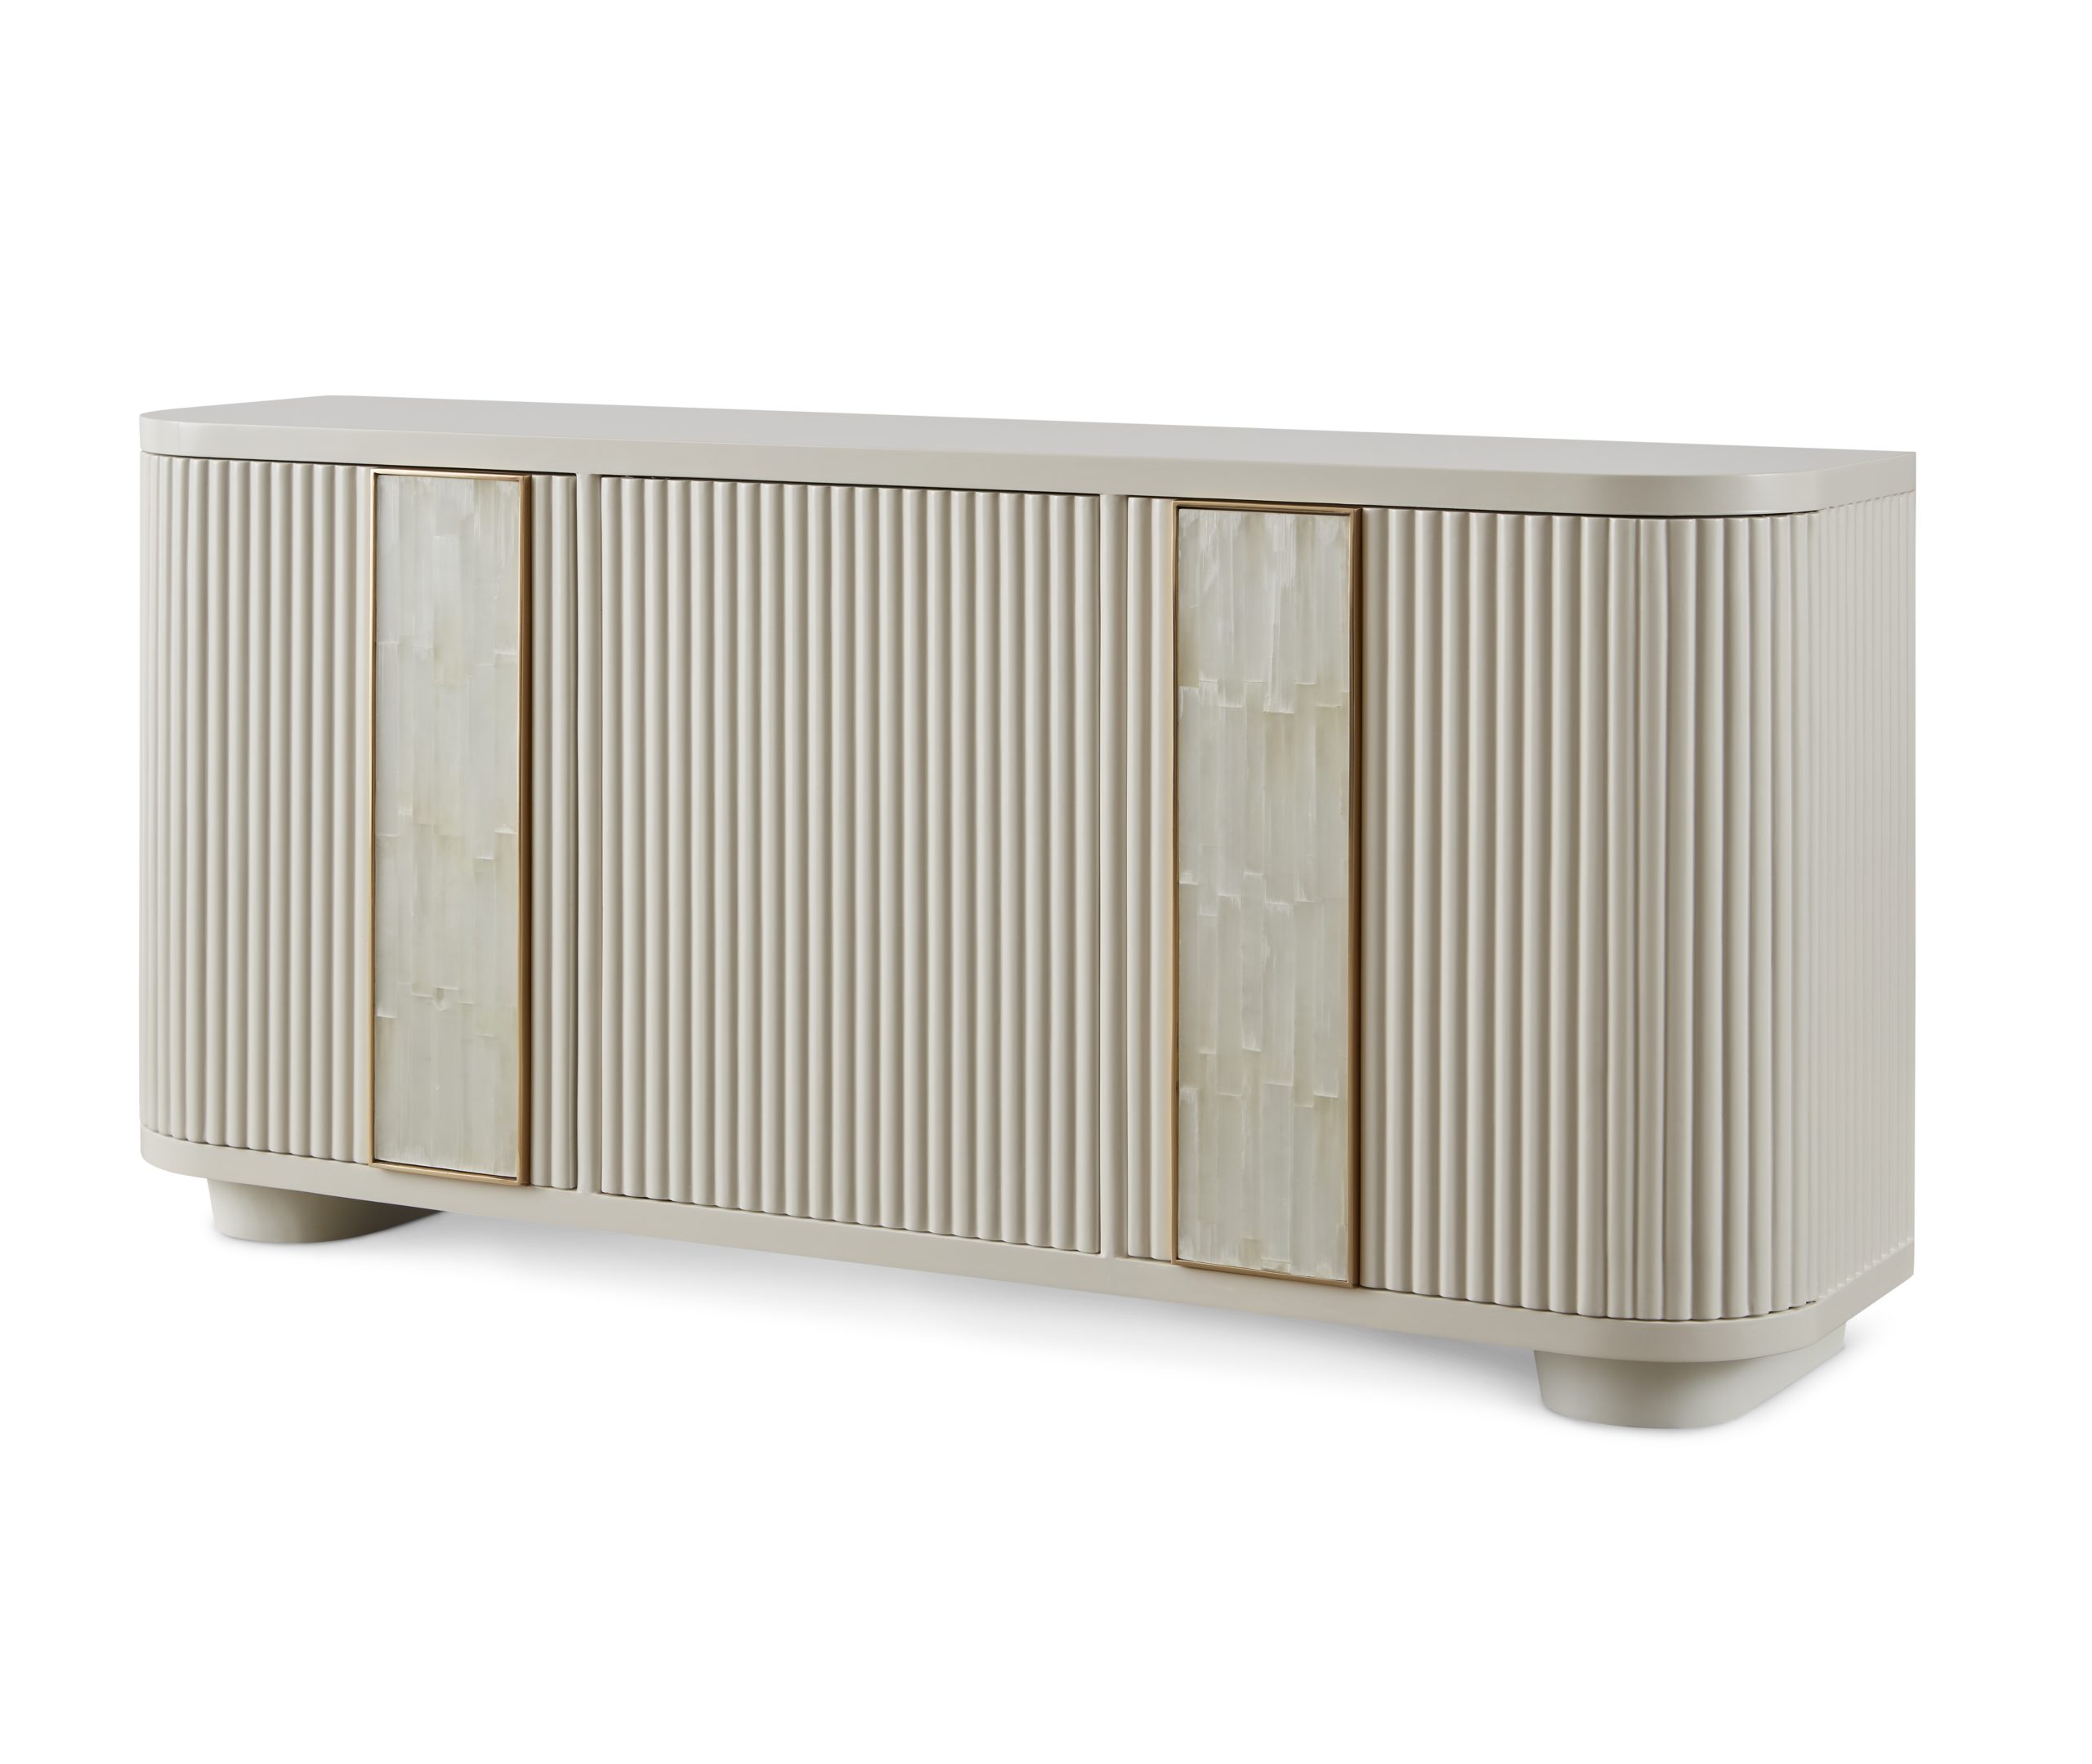 Baker_products_WNWN_harmony_credenza_BAA3275_FRONT_3QRT-scaled-1